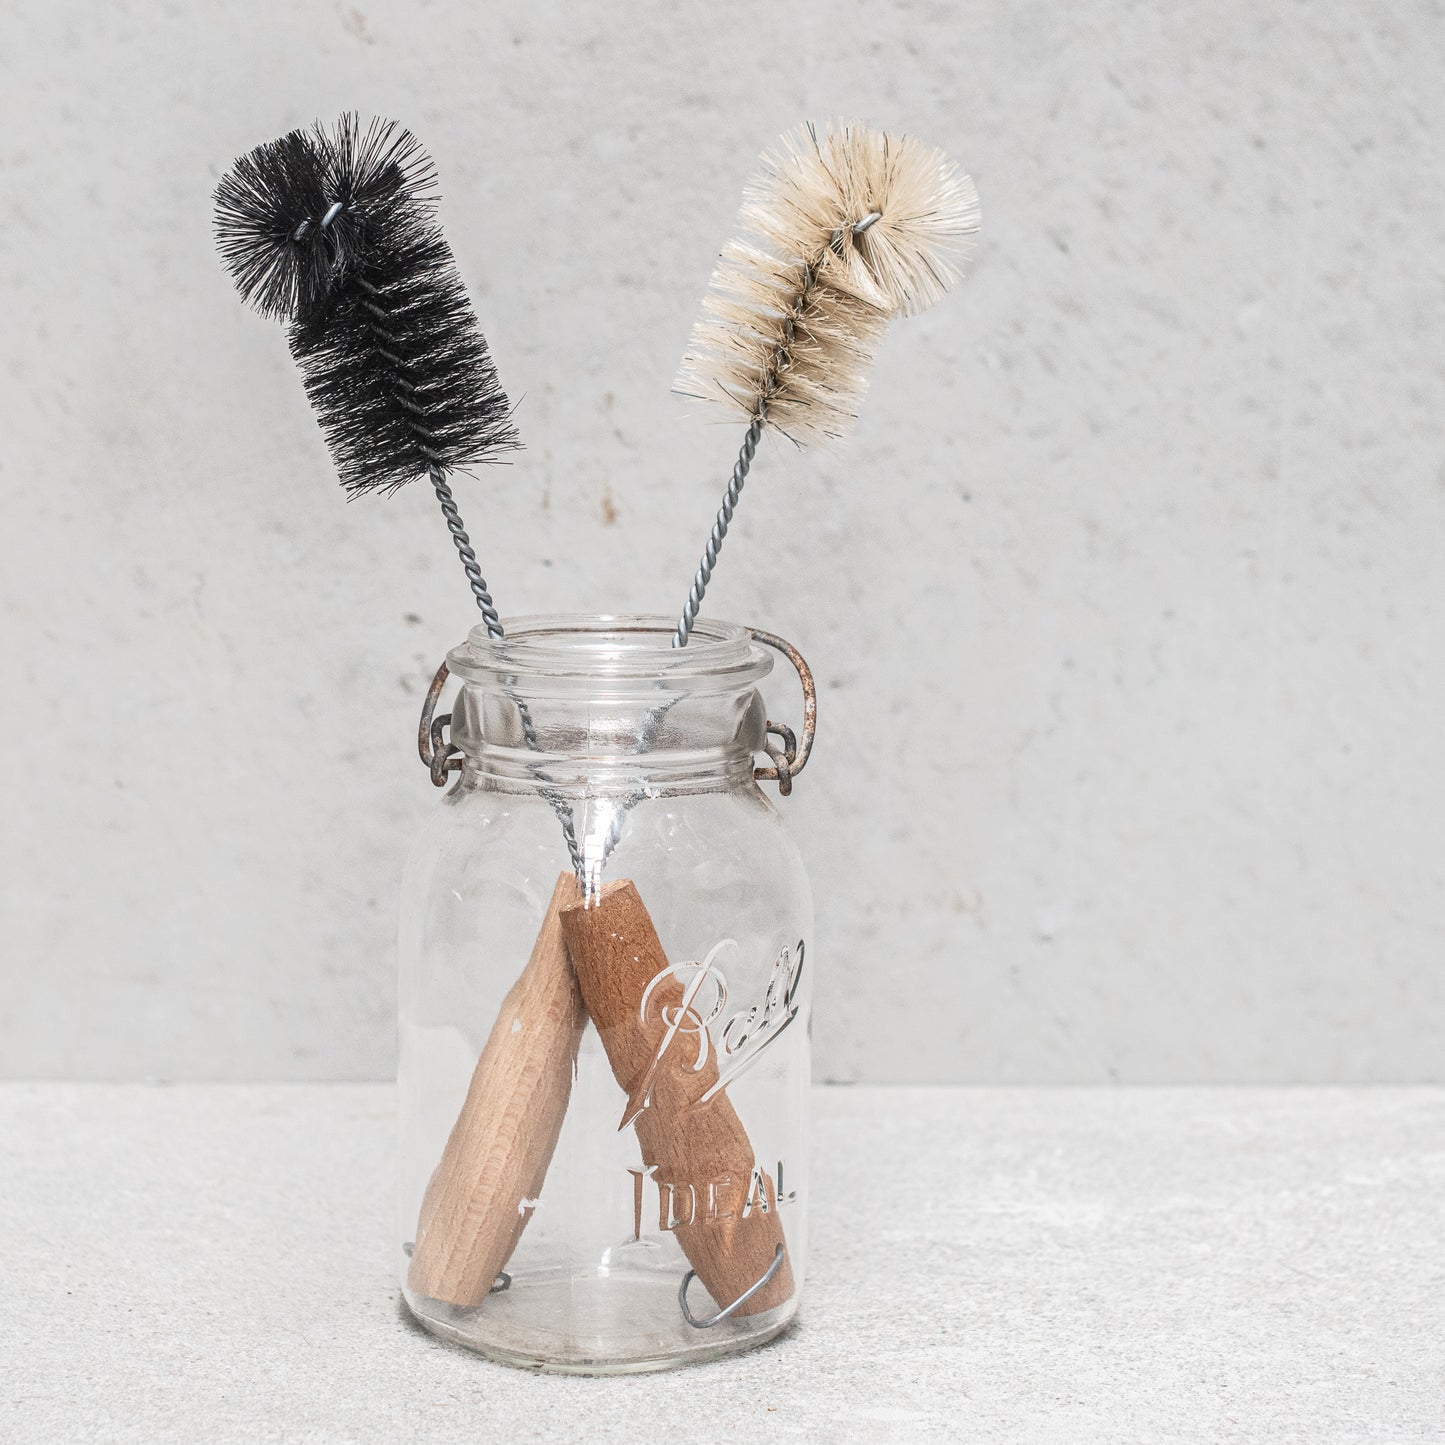 Bottle Brush with Wooden Handle